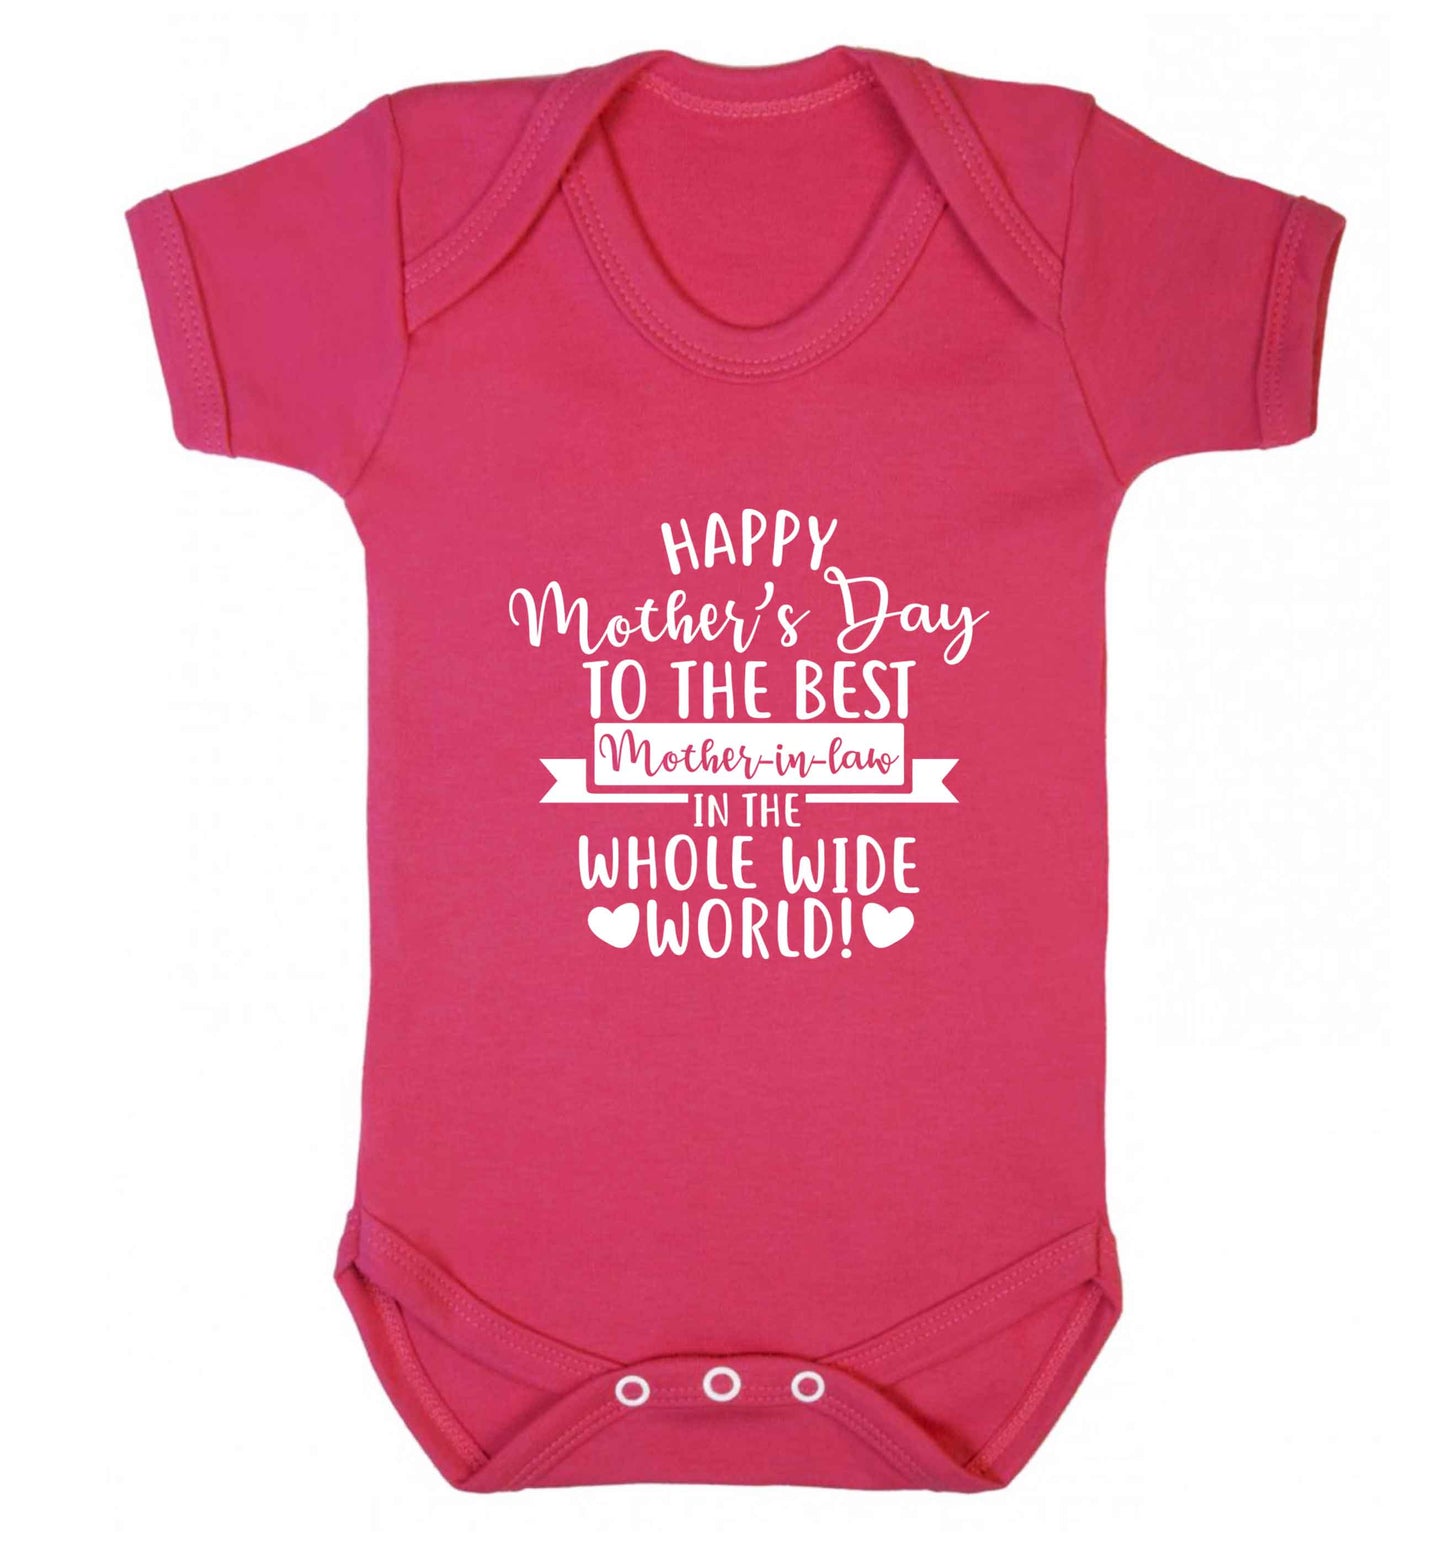 Happy mother's day to the best mother-in law in the world baby vest dark pink 18-24 months